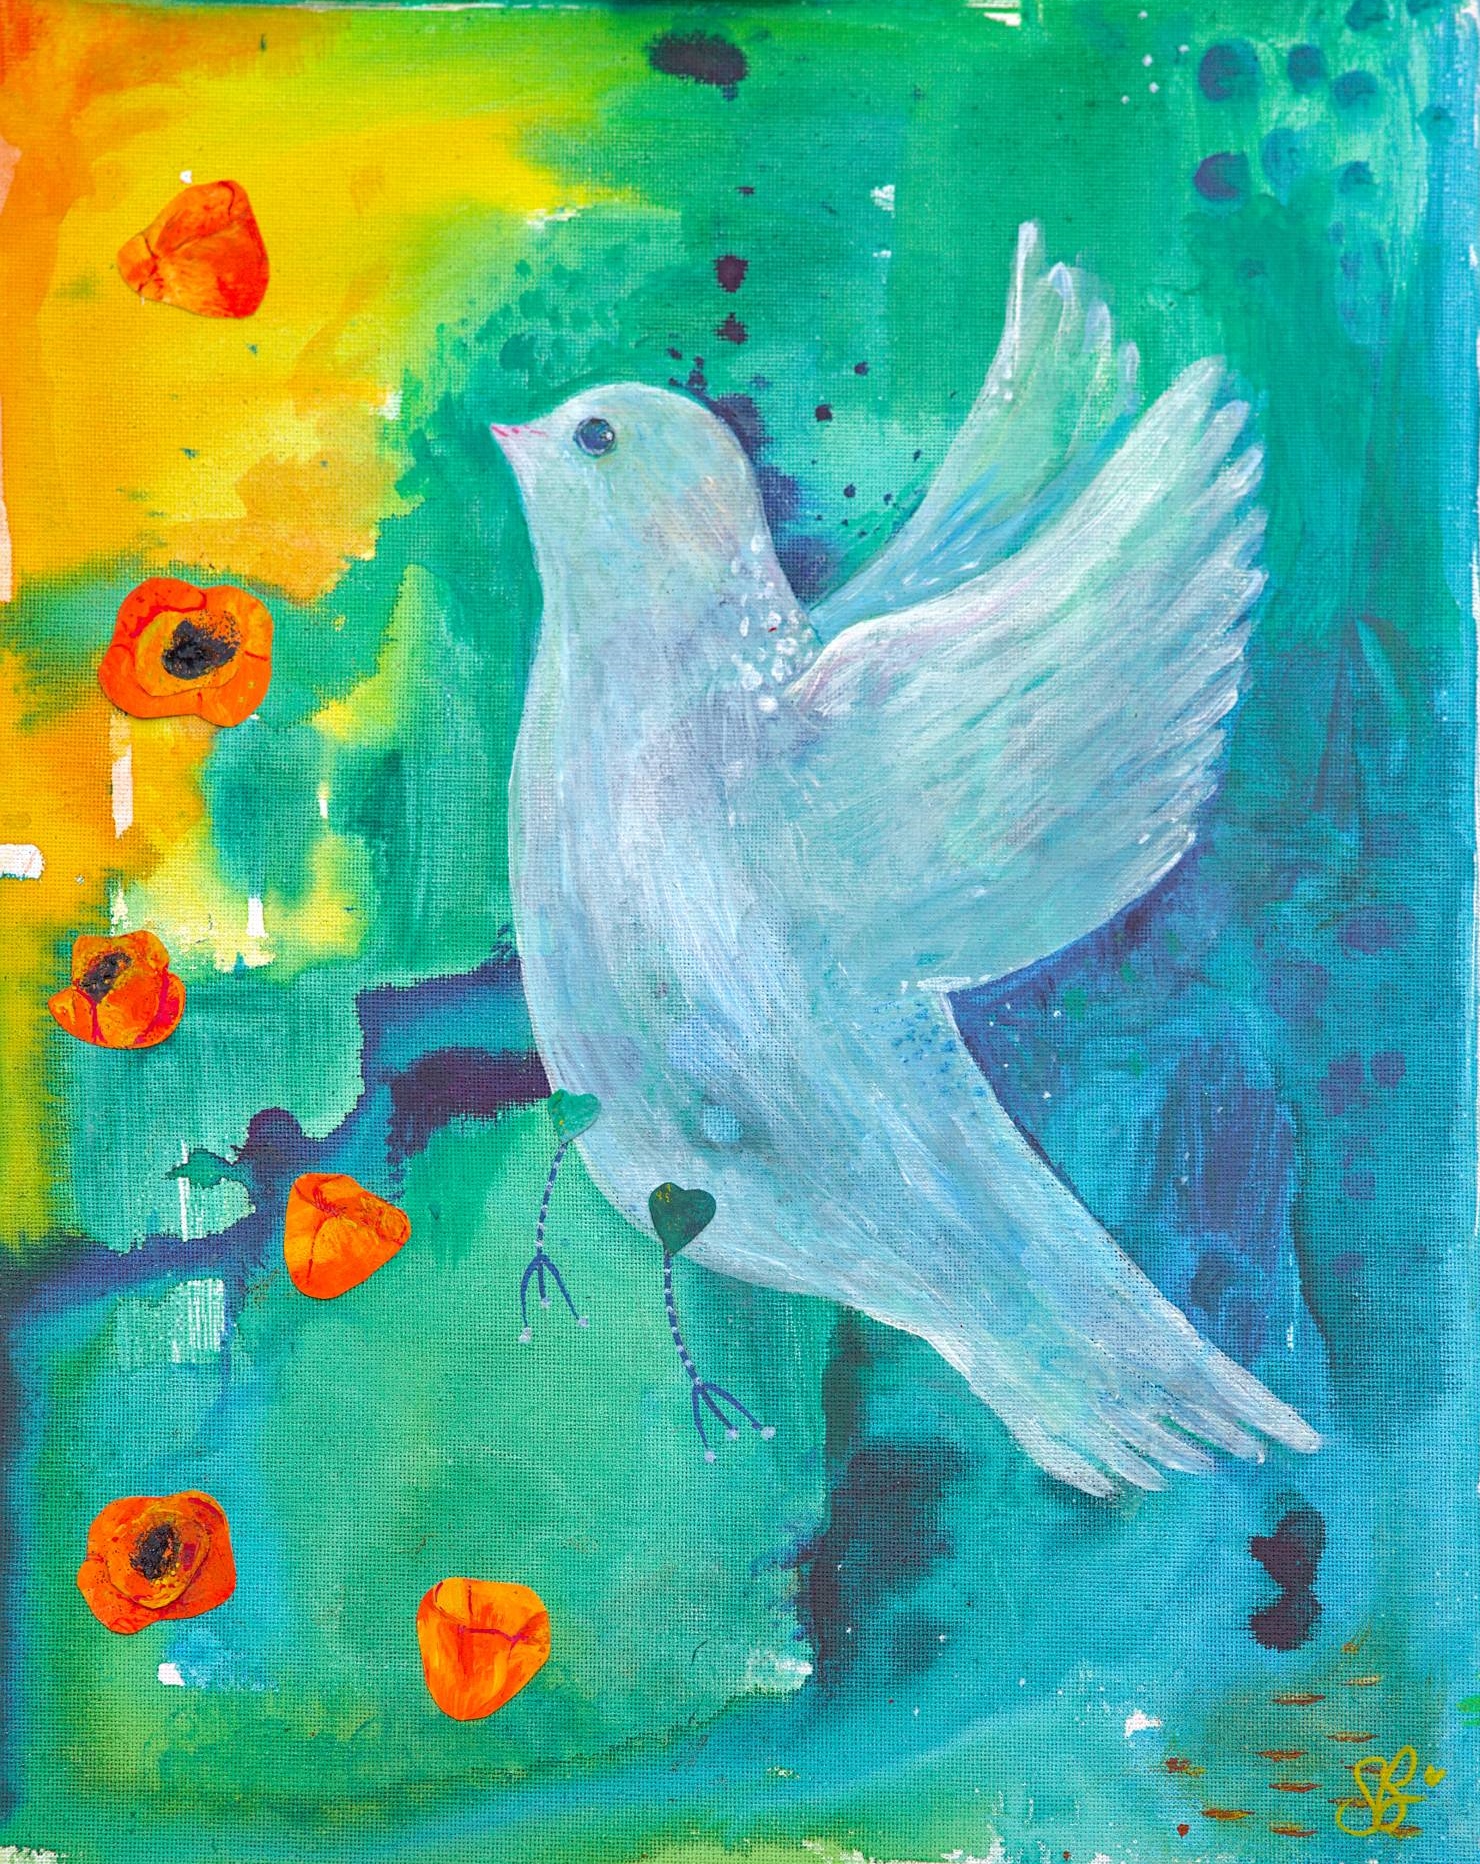 beautiful Dove art print - whimsical dove painting with heart shaped hips and orange poppies (stylised) dancing beside her. As she takes flight she flies towards an abstract sun and above an abstract landscape of teals and greens